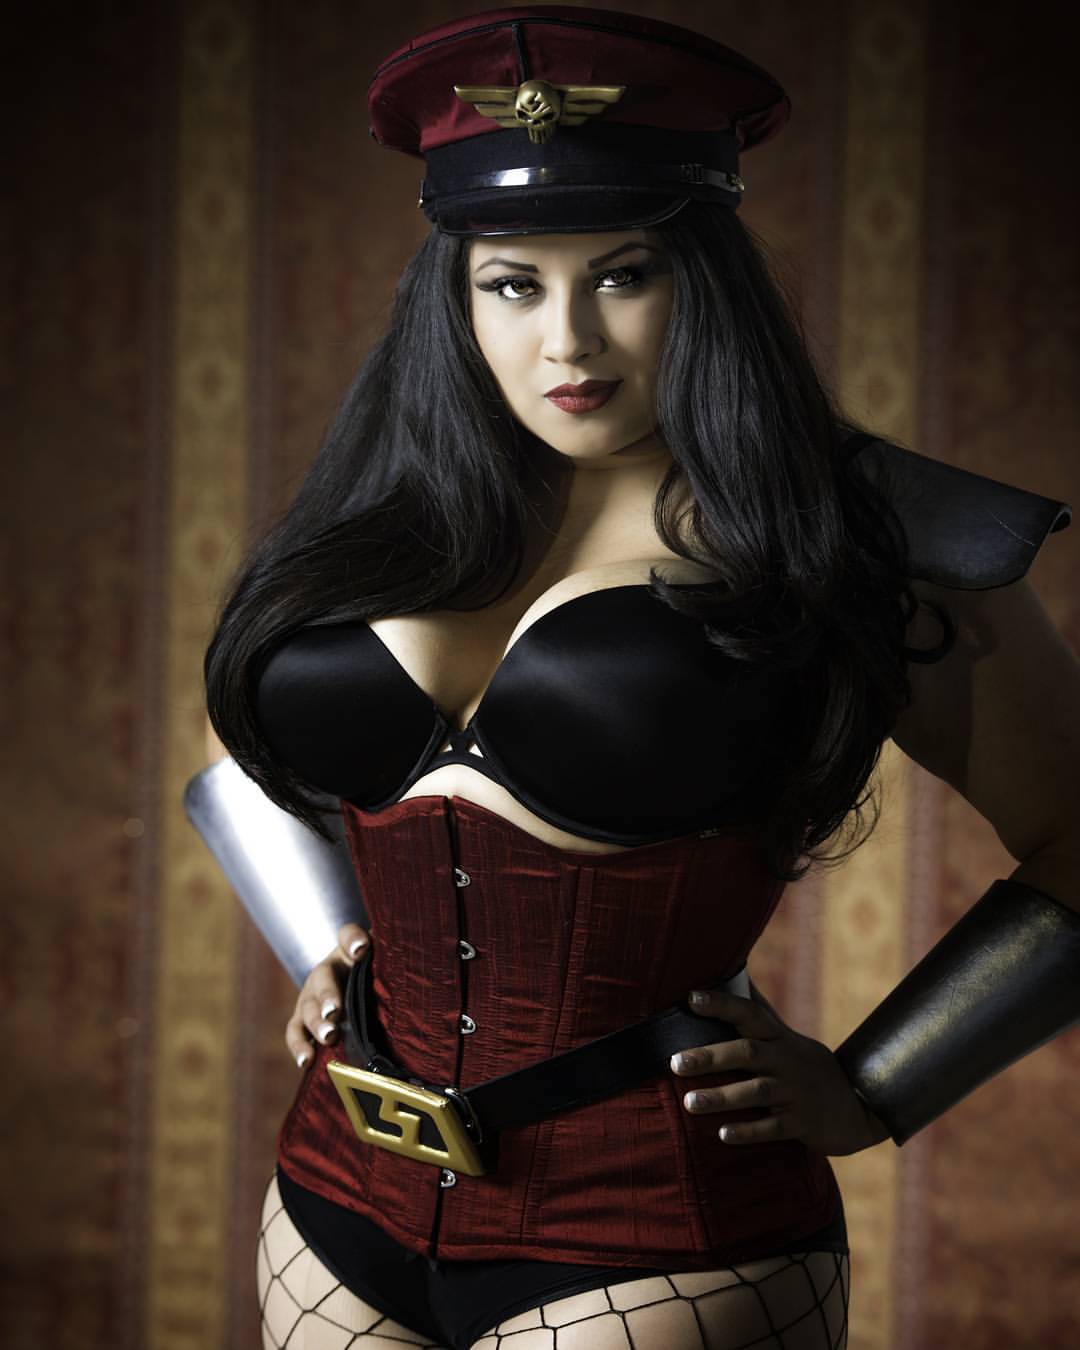 ivydoomkitty: Only 5 days left to sign up to my fanclub and get access to my private